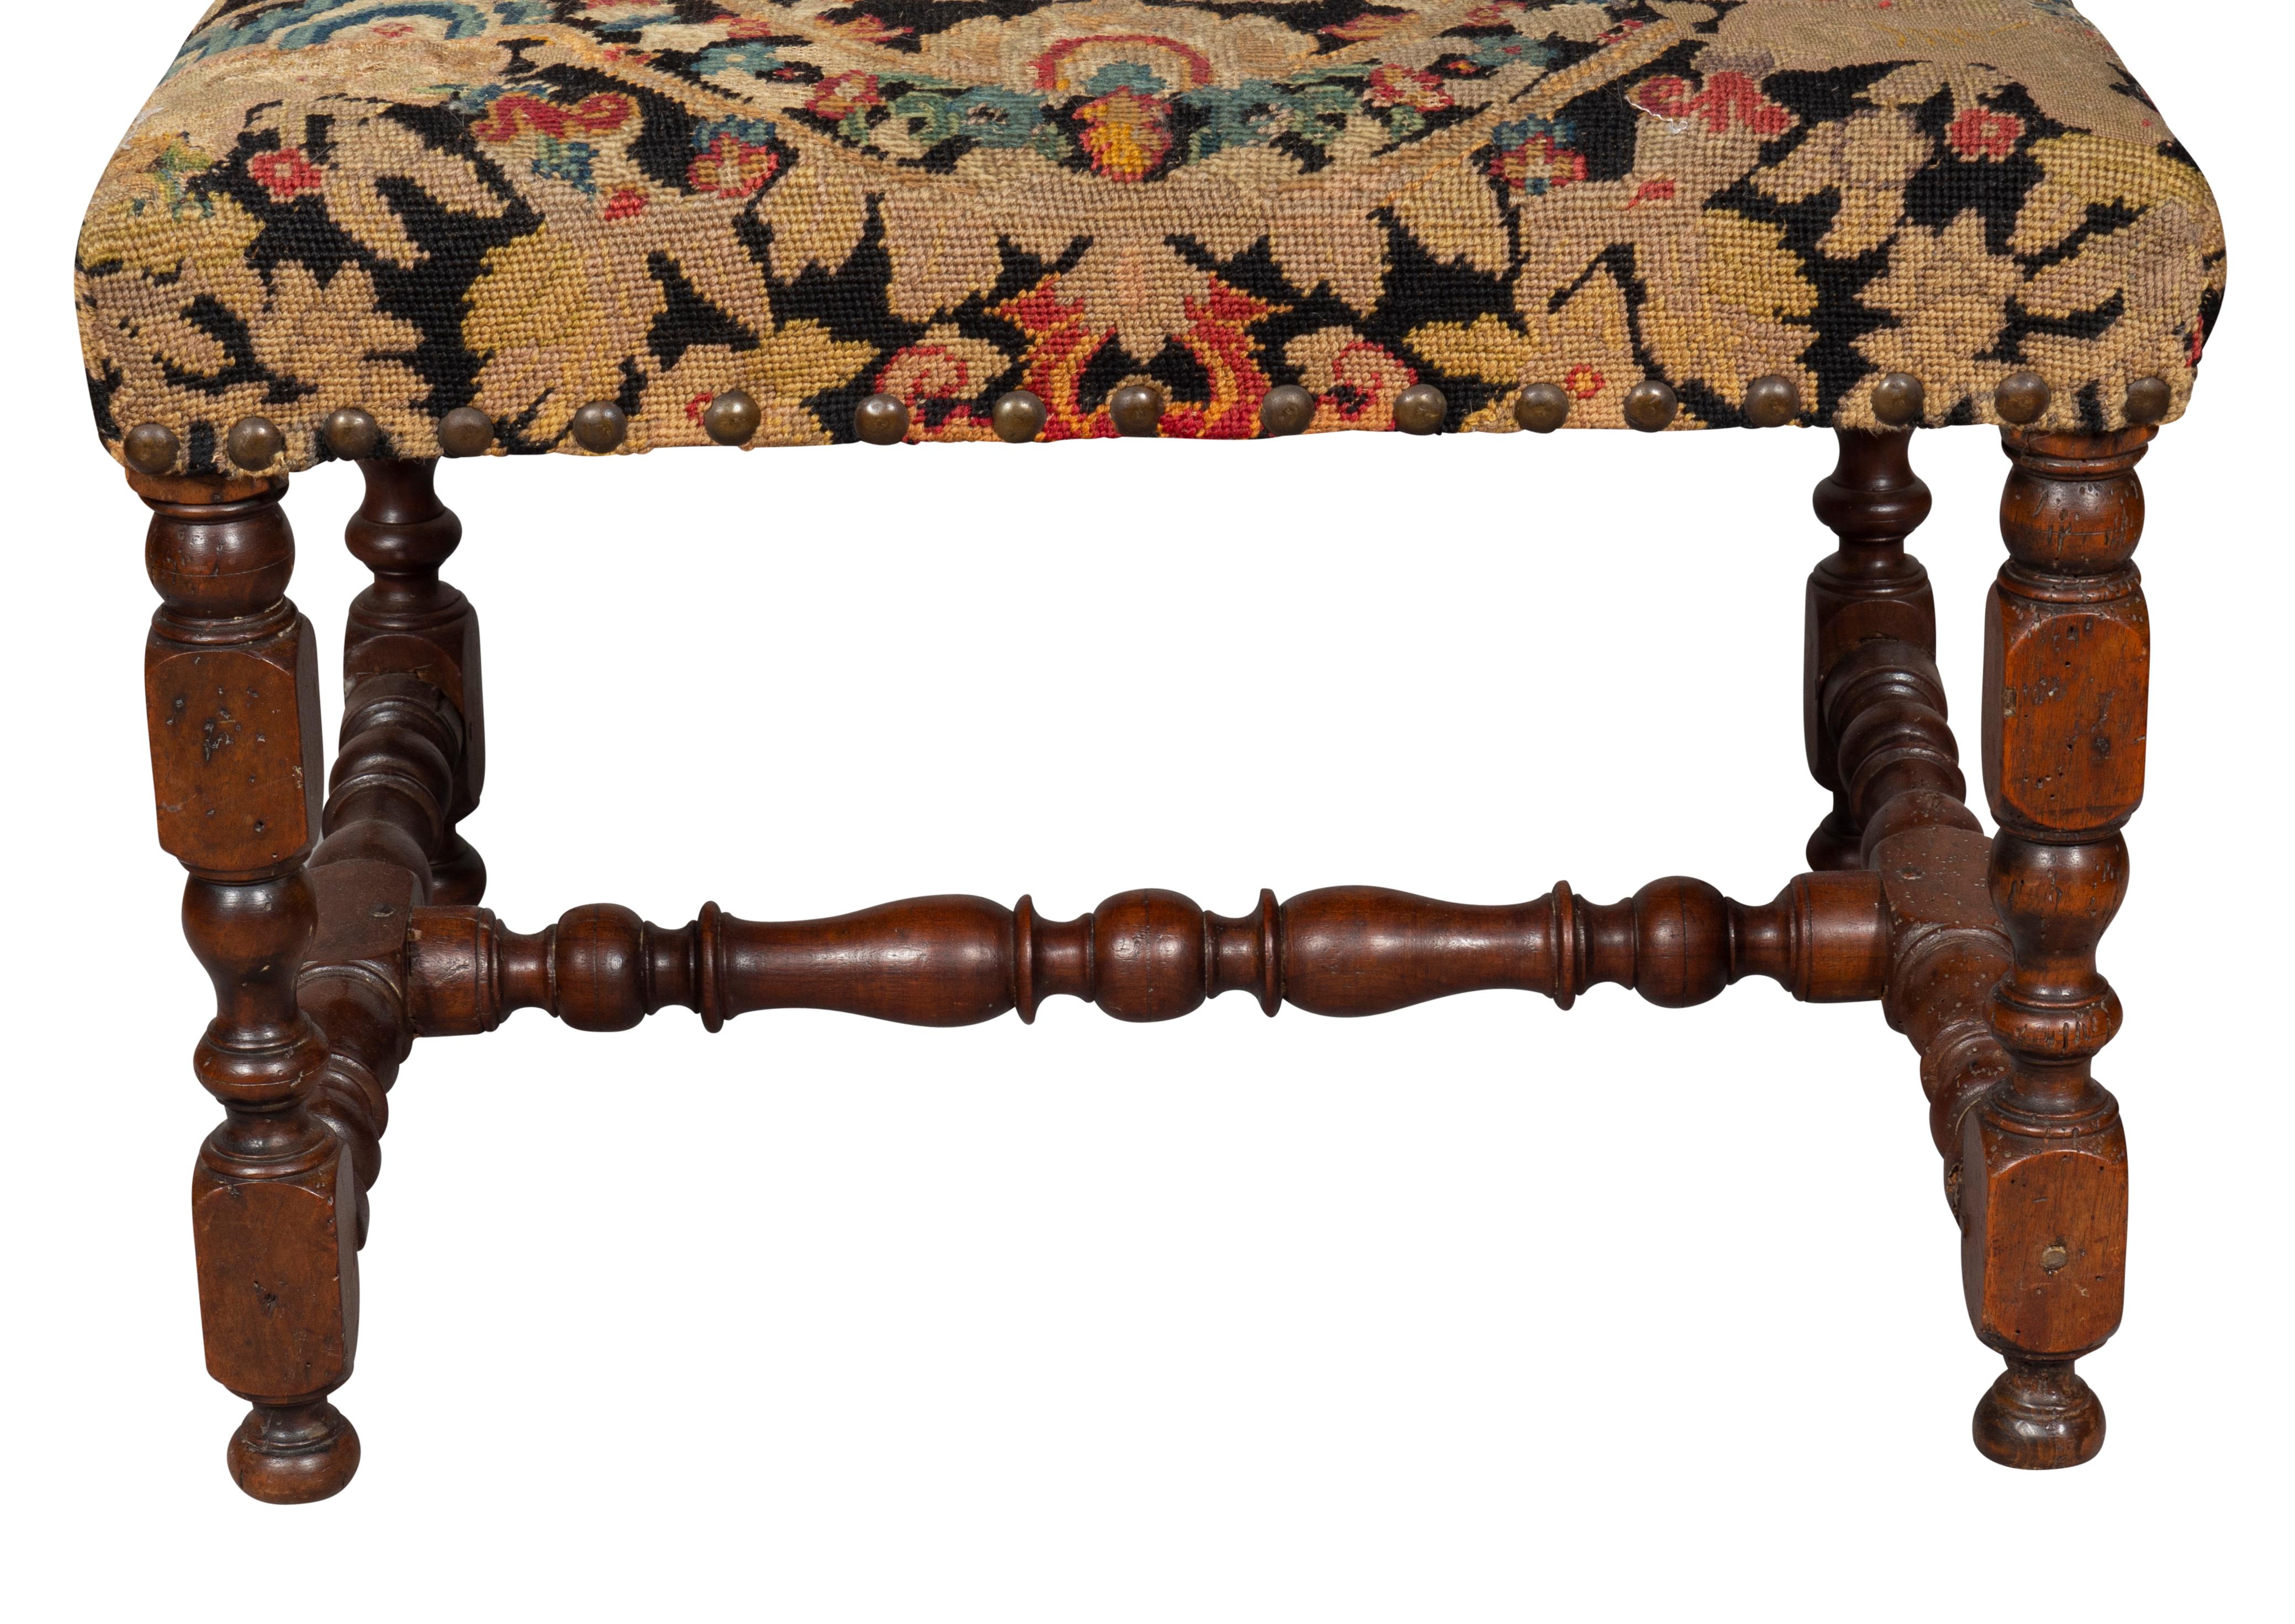 Rectangular with needlepoint seat raised on turned legs with H form turned stretcher.